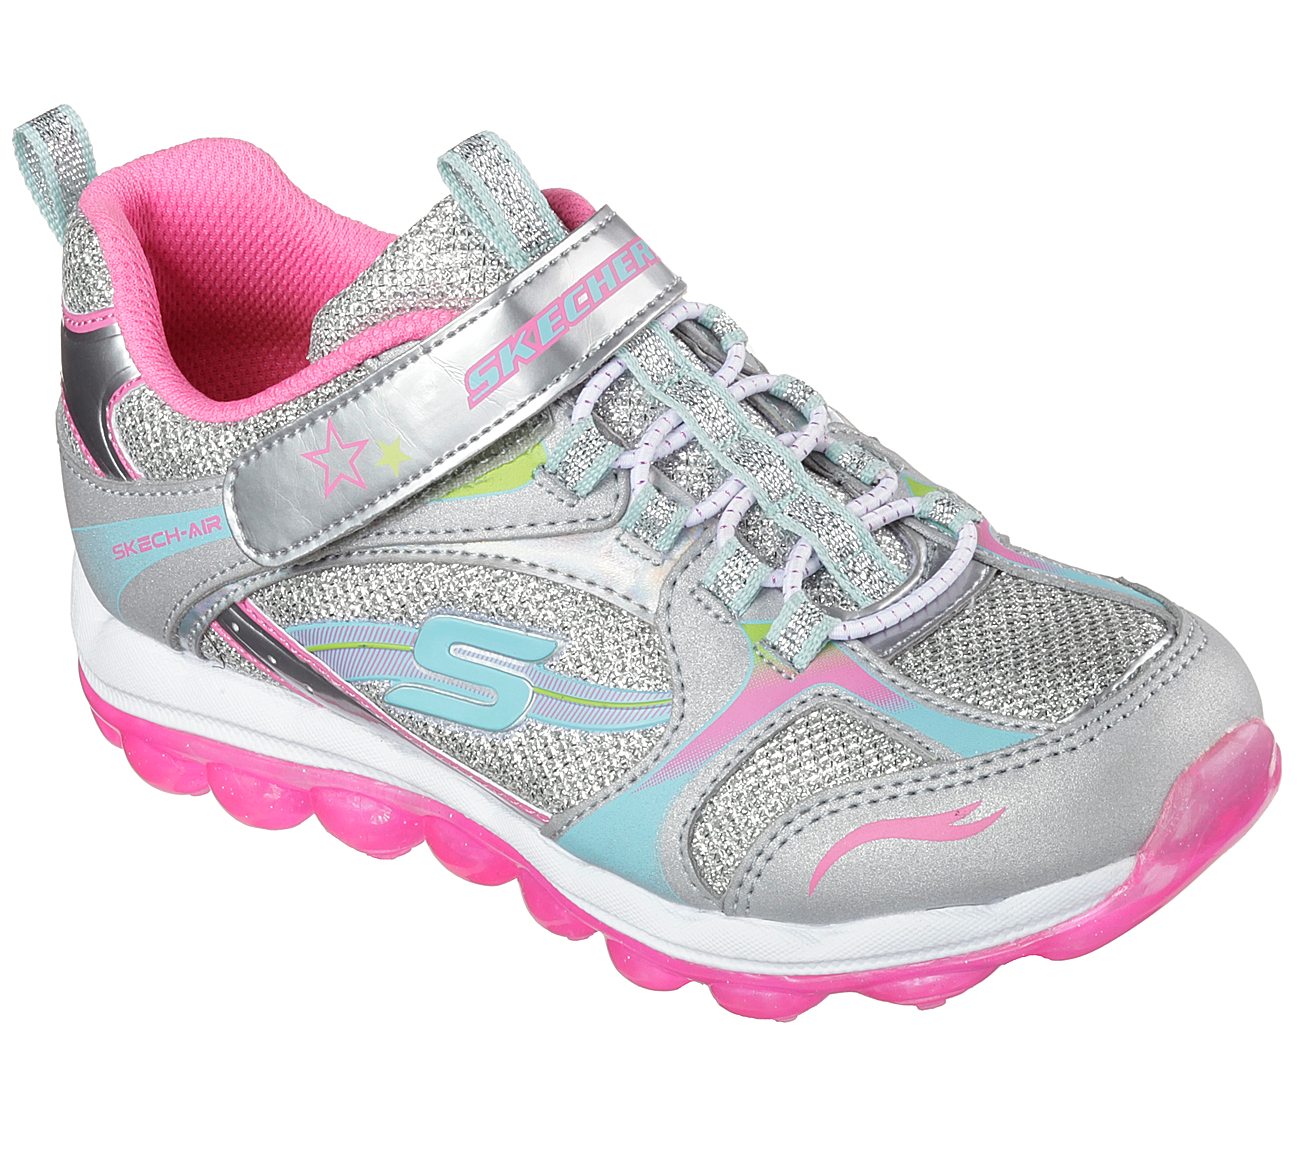 running shoes with air bubble